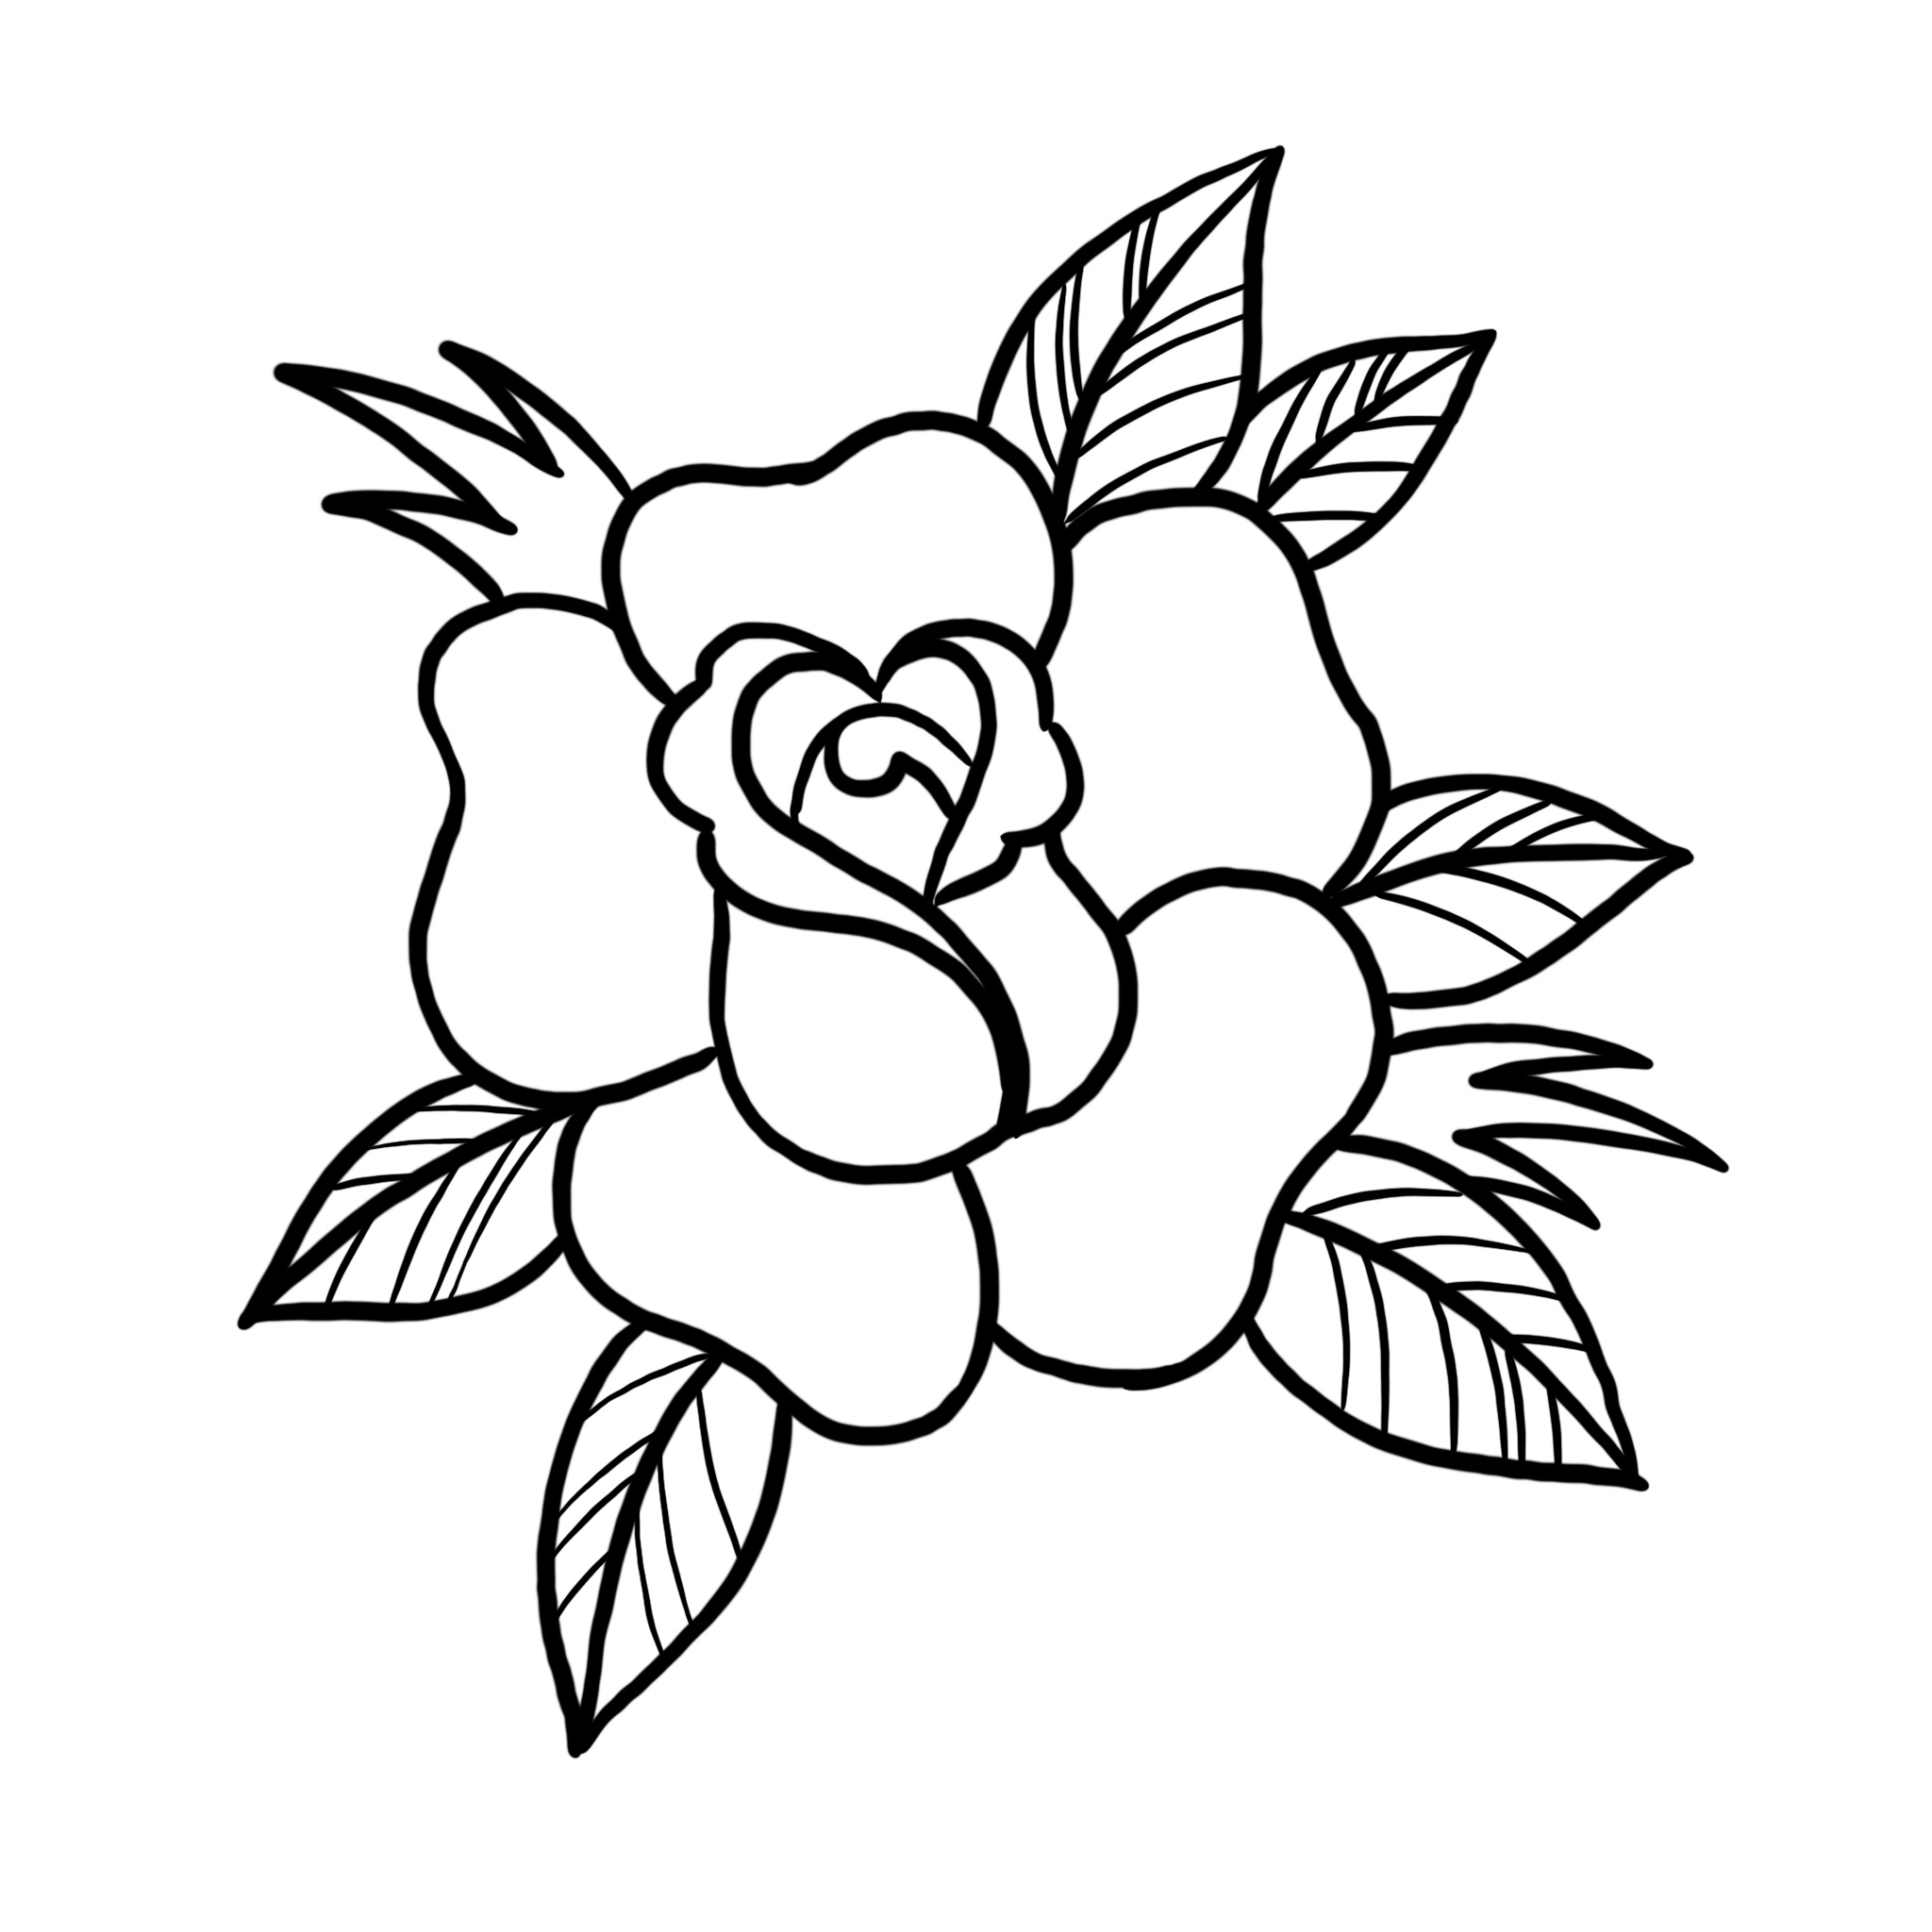 Easy How to Draw a Rose Tutorial Video and Rose Coloring Page-saigonsouth.com.vn